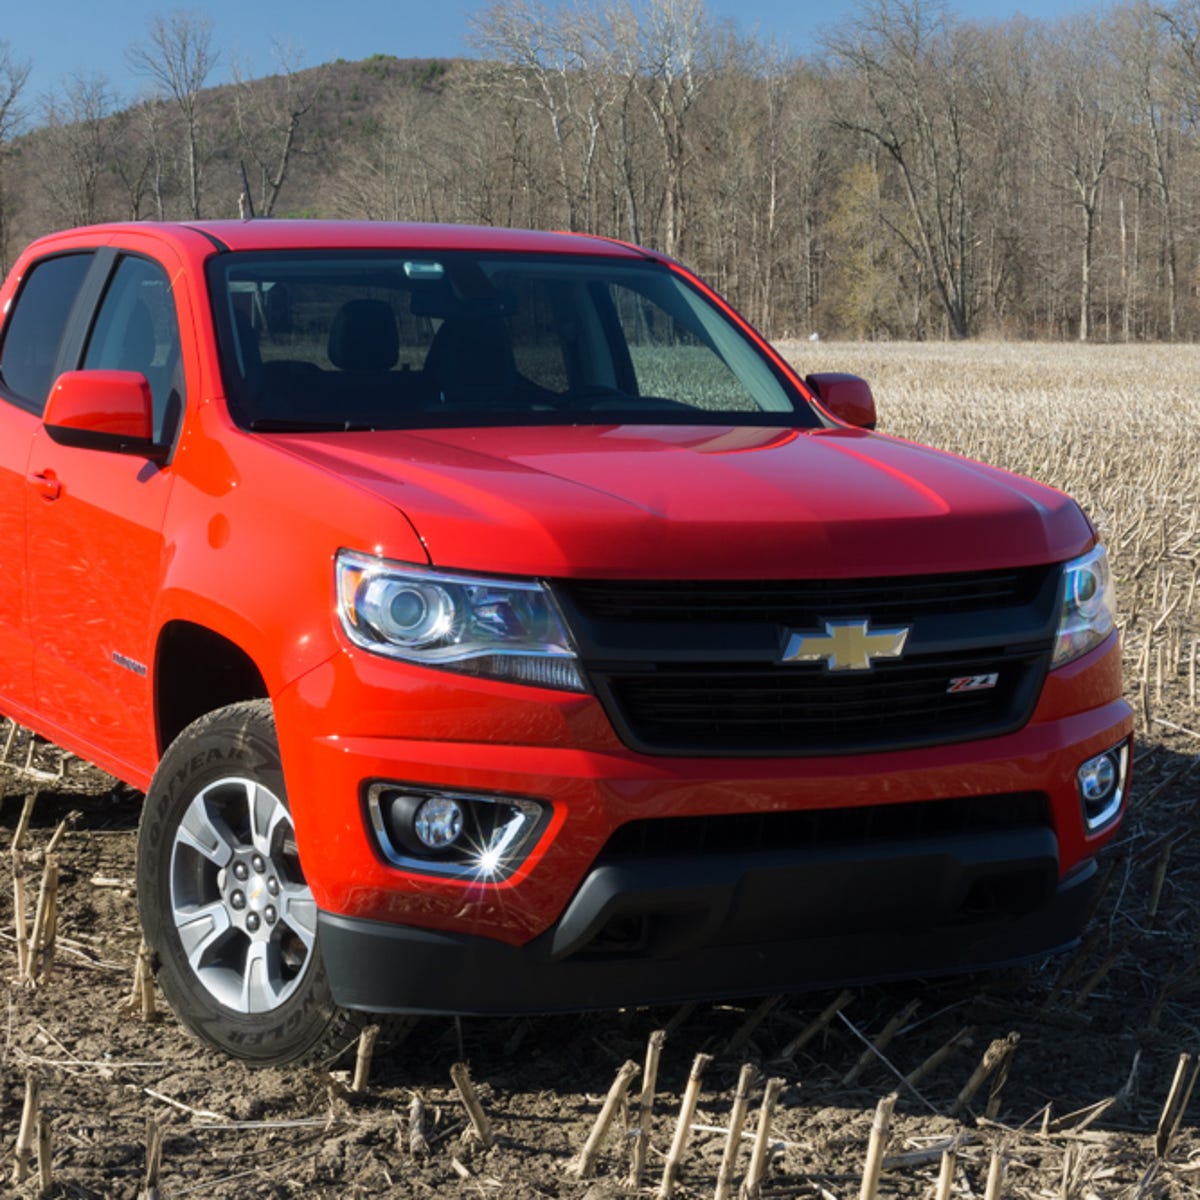 2015 Chevrolet Colorado Crew Cab review: Chevy\'s Colorado Crew Cab is an  almost-perfect compromise - CNET